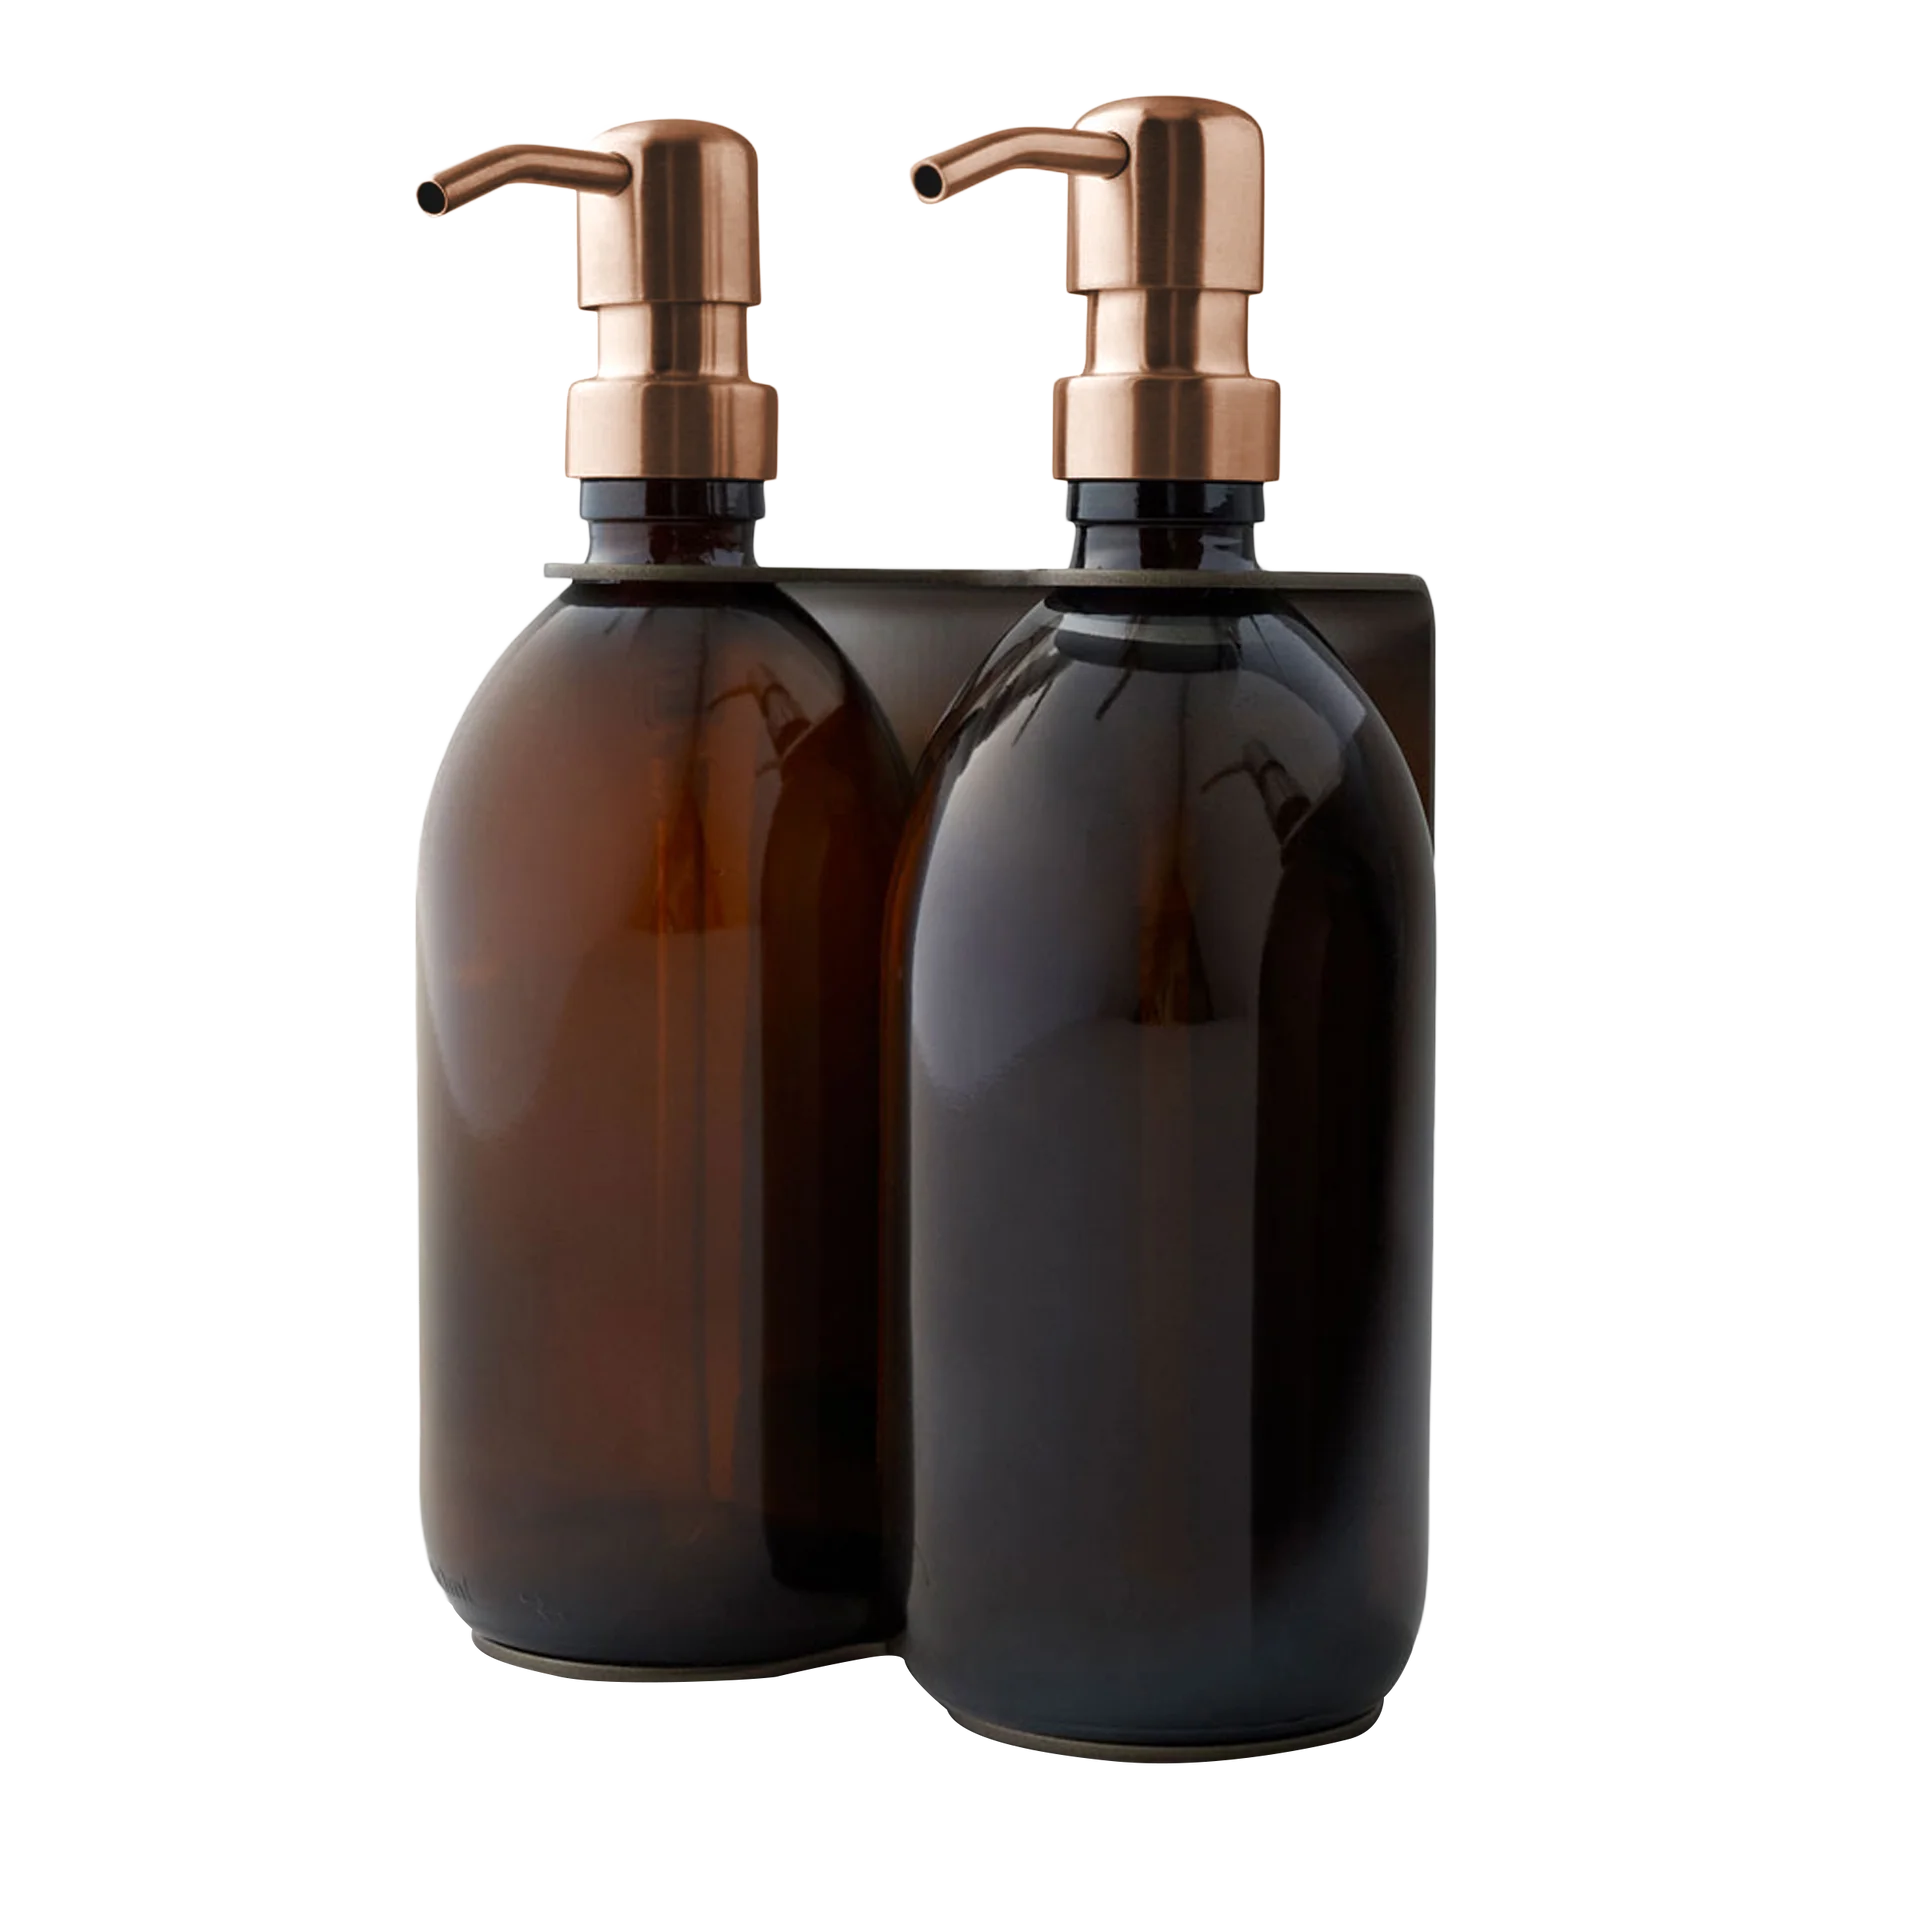 Satin Silver Double Wall Mounted Soap Dispenser with amber dispensers and bronze pumps